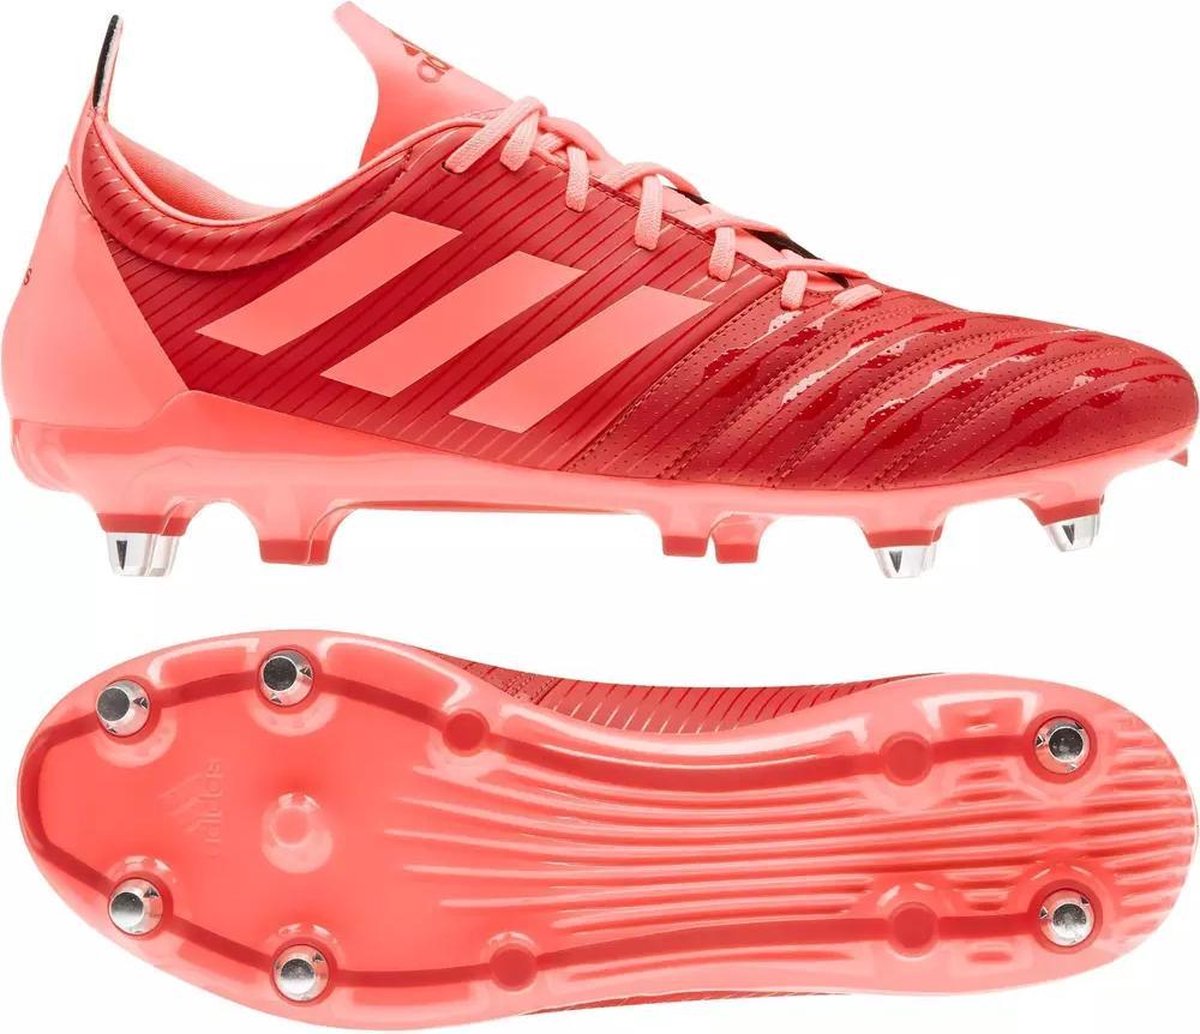 Chaussure de rugby Adidas Malice Elite SG taille 45 2/3 EU, 10.5 UK | bol